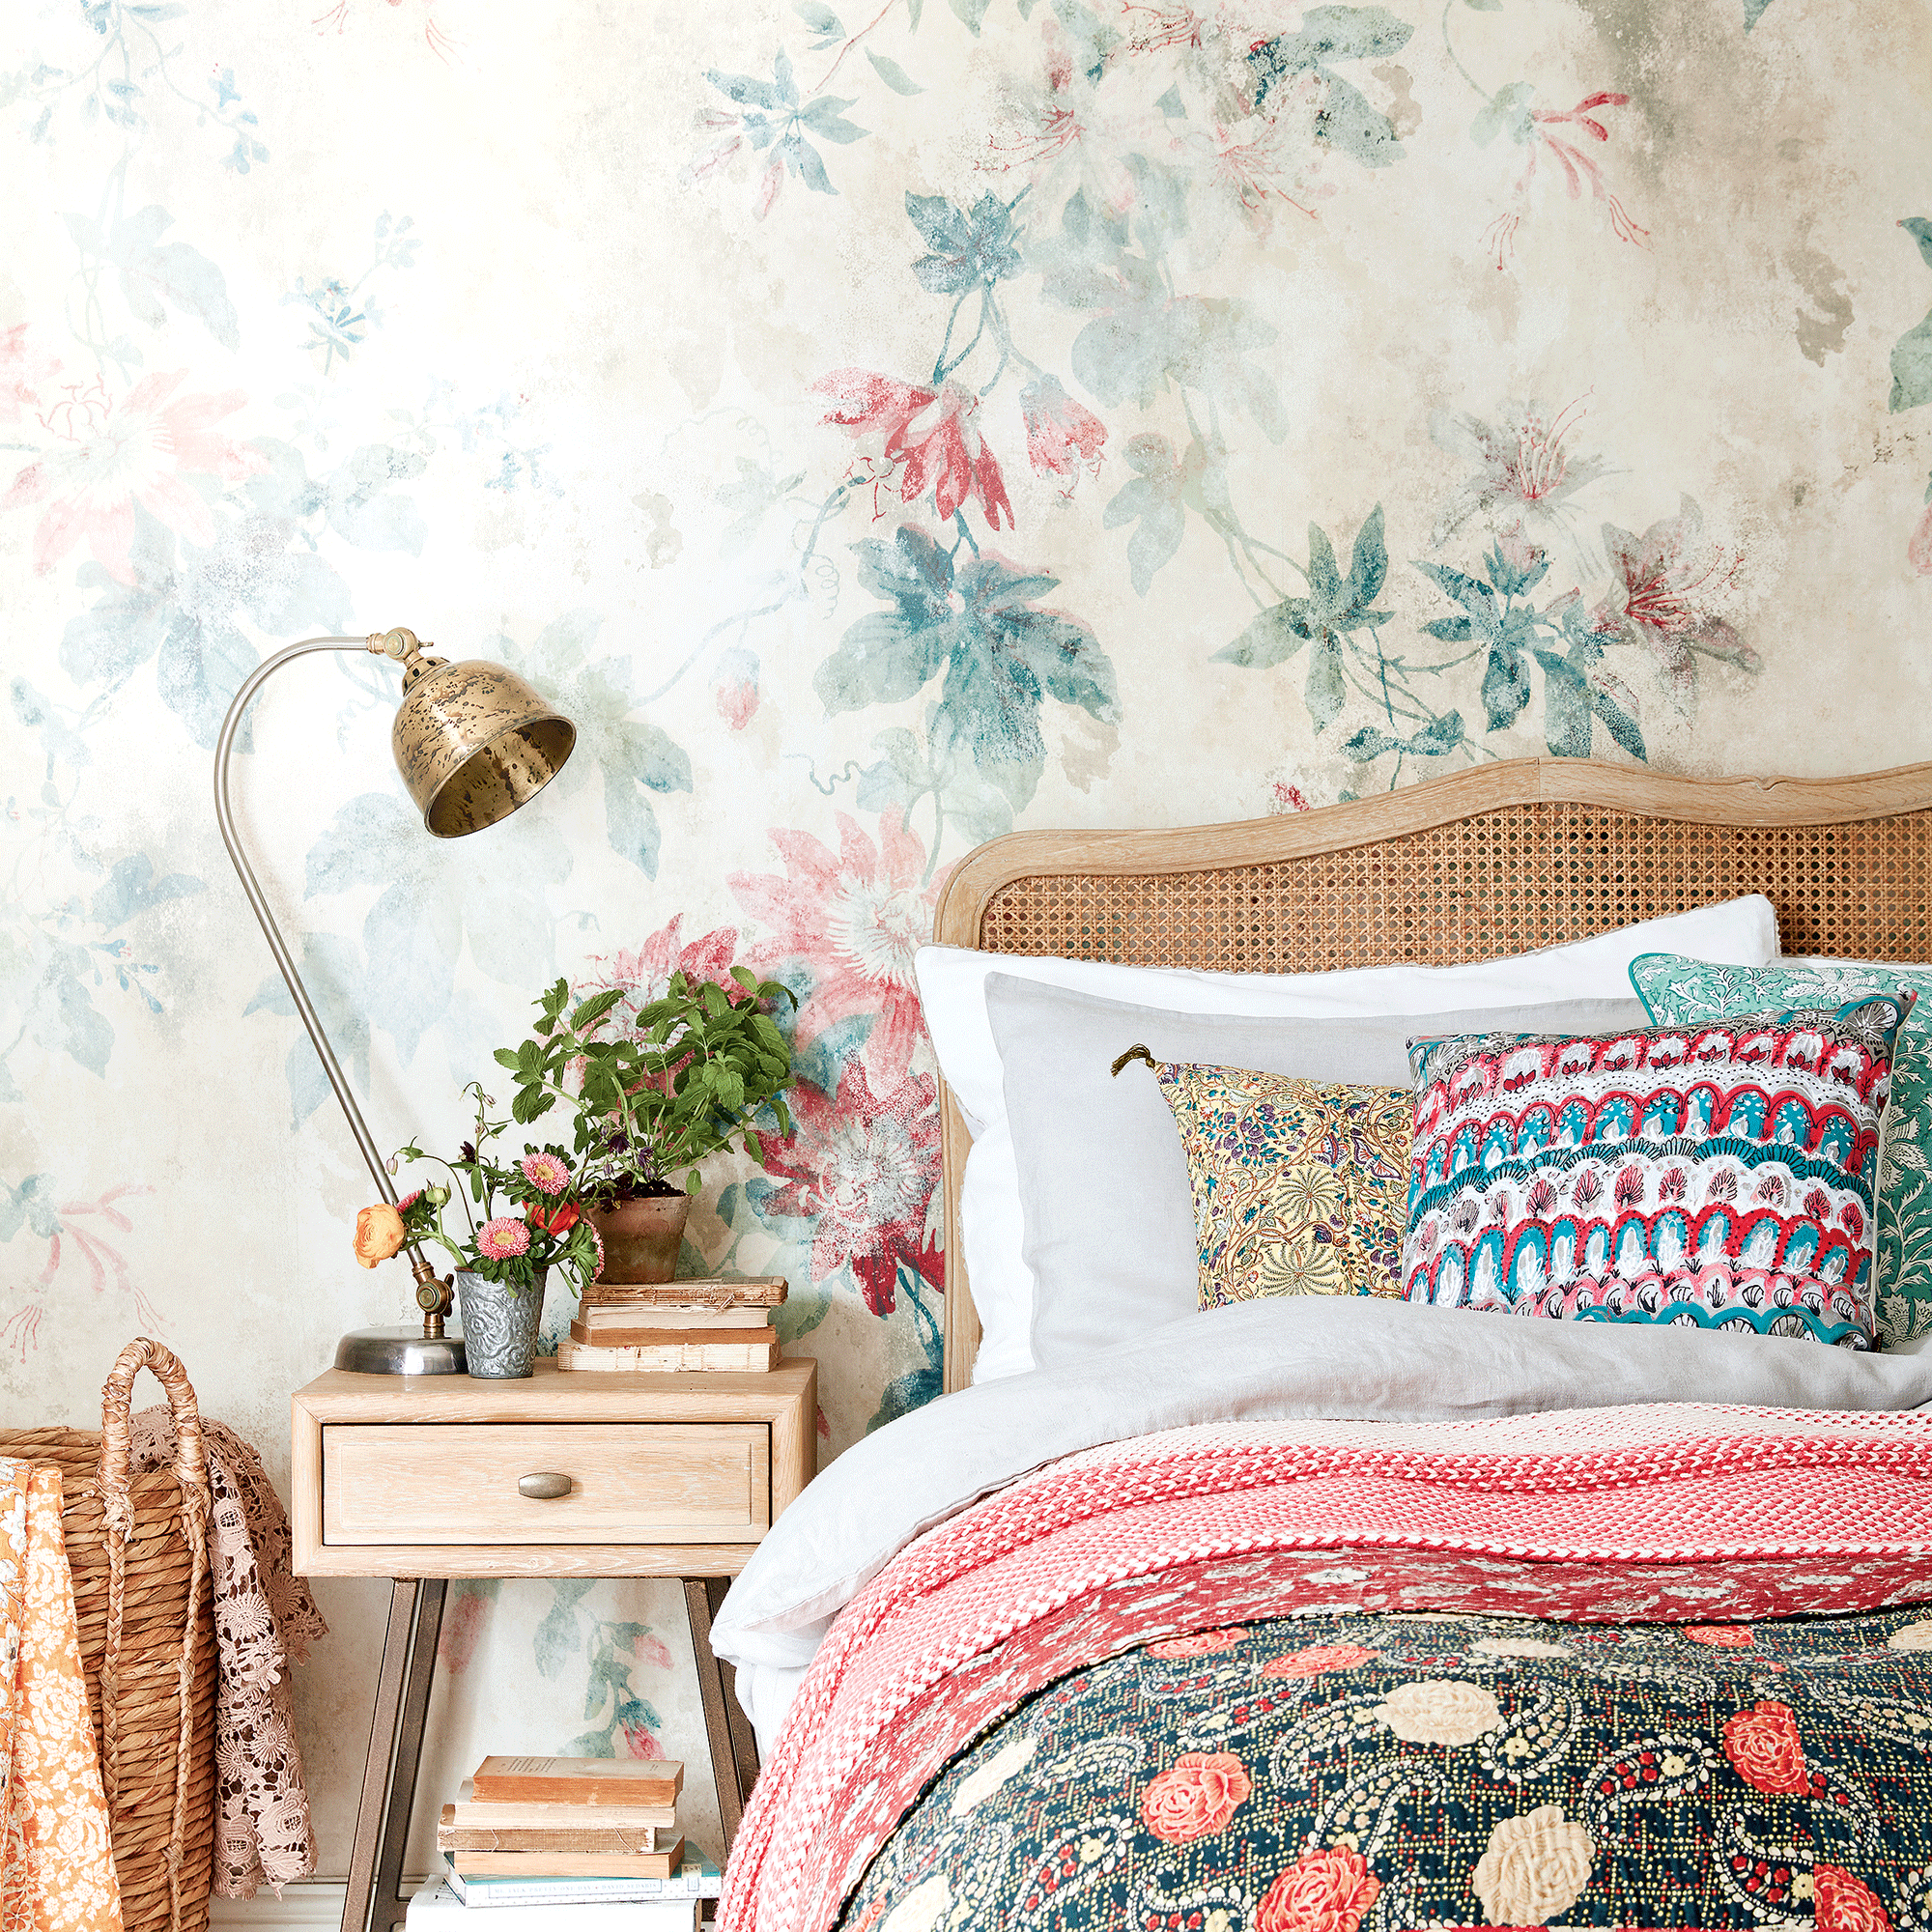 Bedroom with floral wallpaper